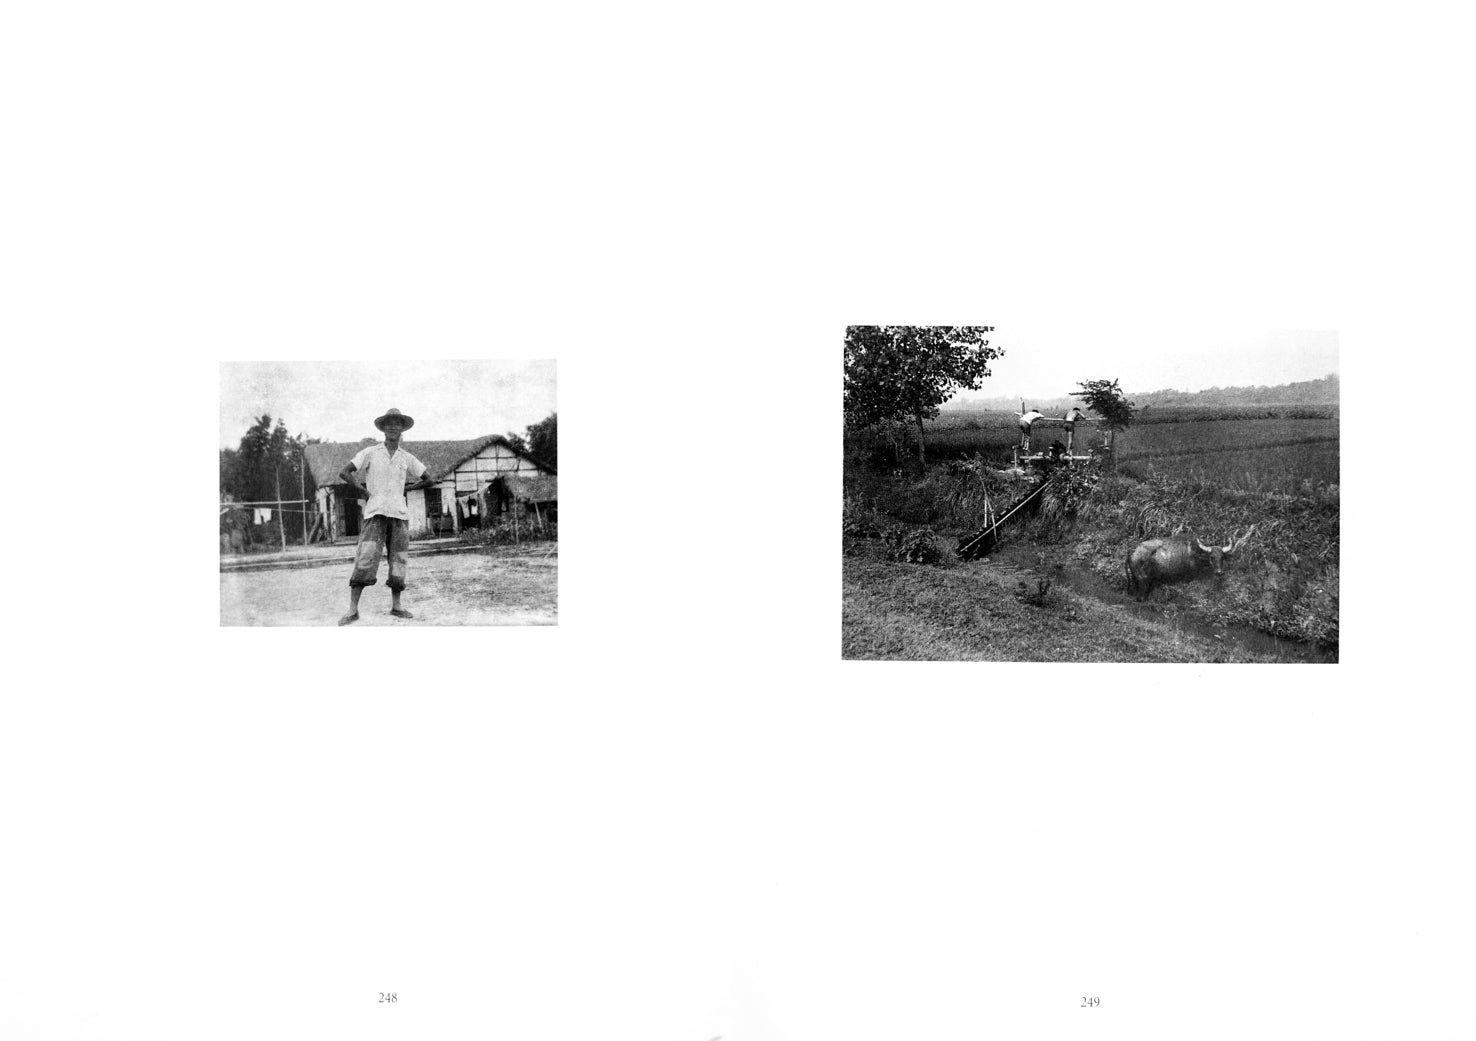 Spread of the pages 248 and 249, on the left page depicting a figure in a hat, standing in front pf what appears to be a village. On the right, we see workers on a field and a buffalo standing in a trench, looking towards the camera. Both images are black and white and sit centred on the respective pages.